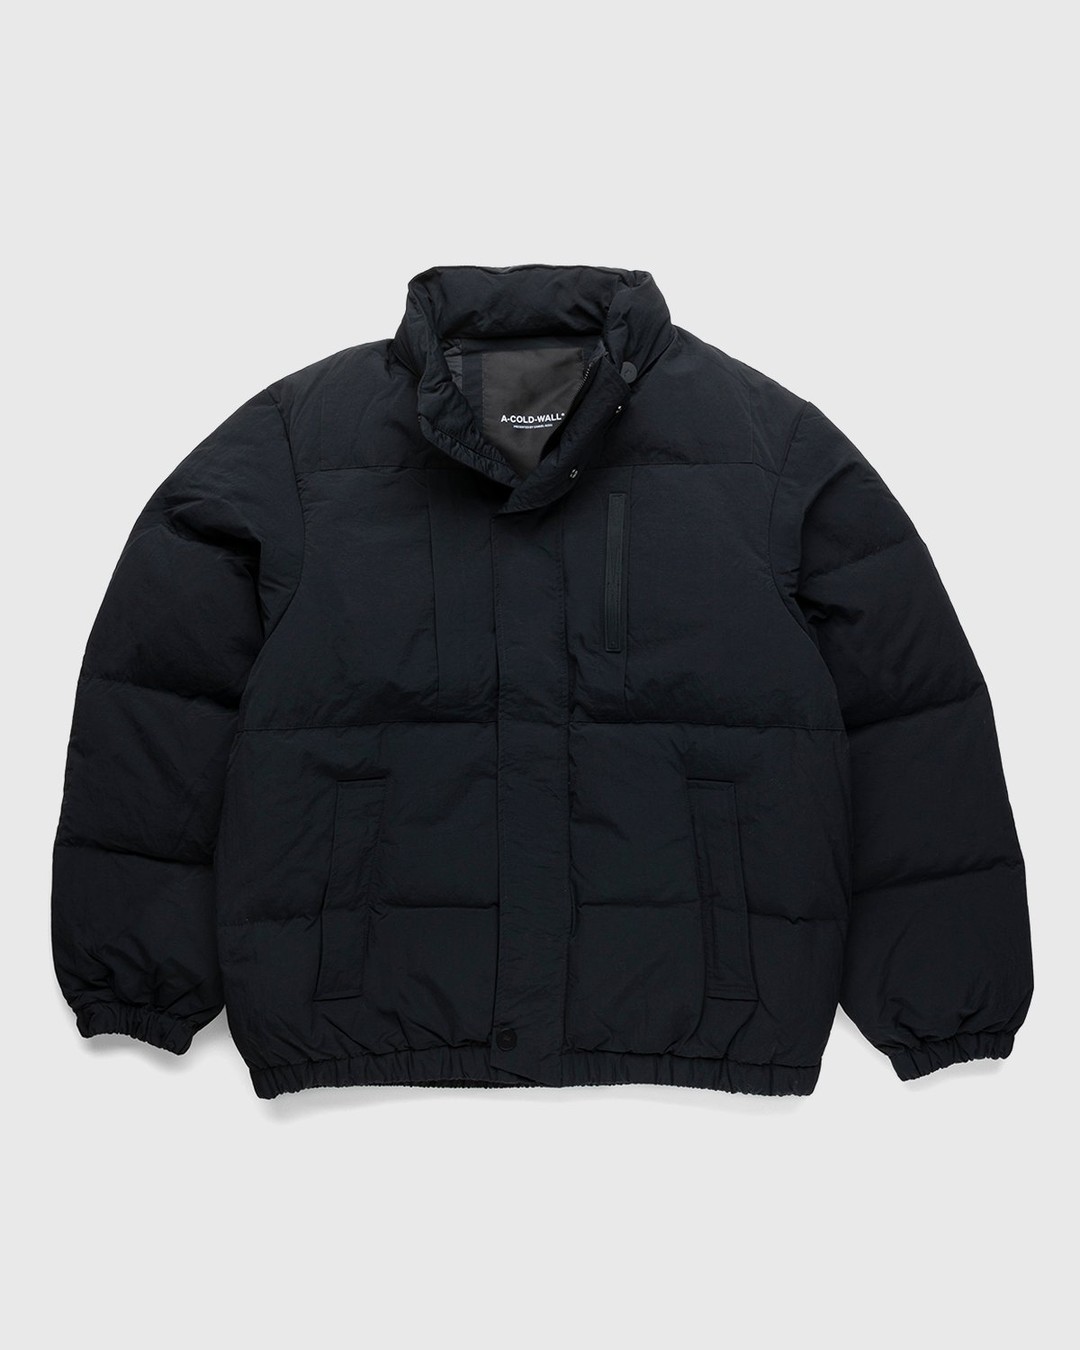 A-Cold-Wall* – Cirrus Jacket Black - Outerwear - Black - Image 1